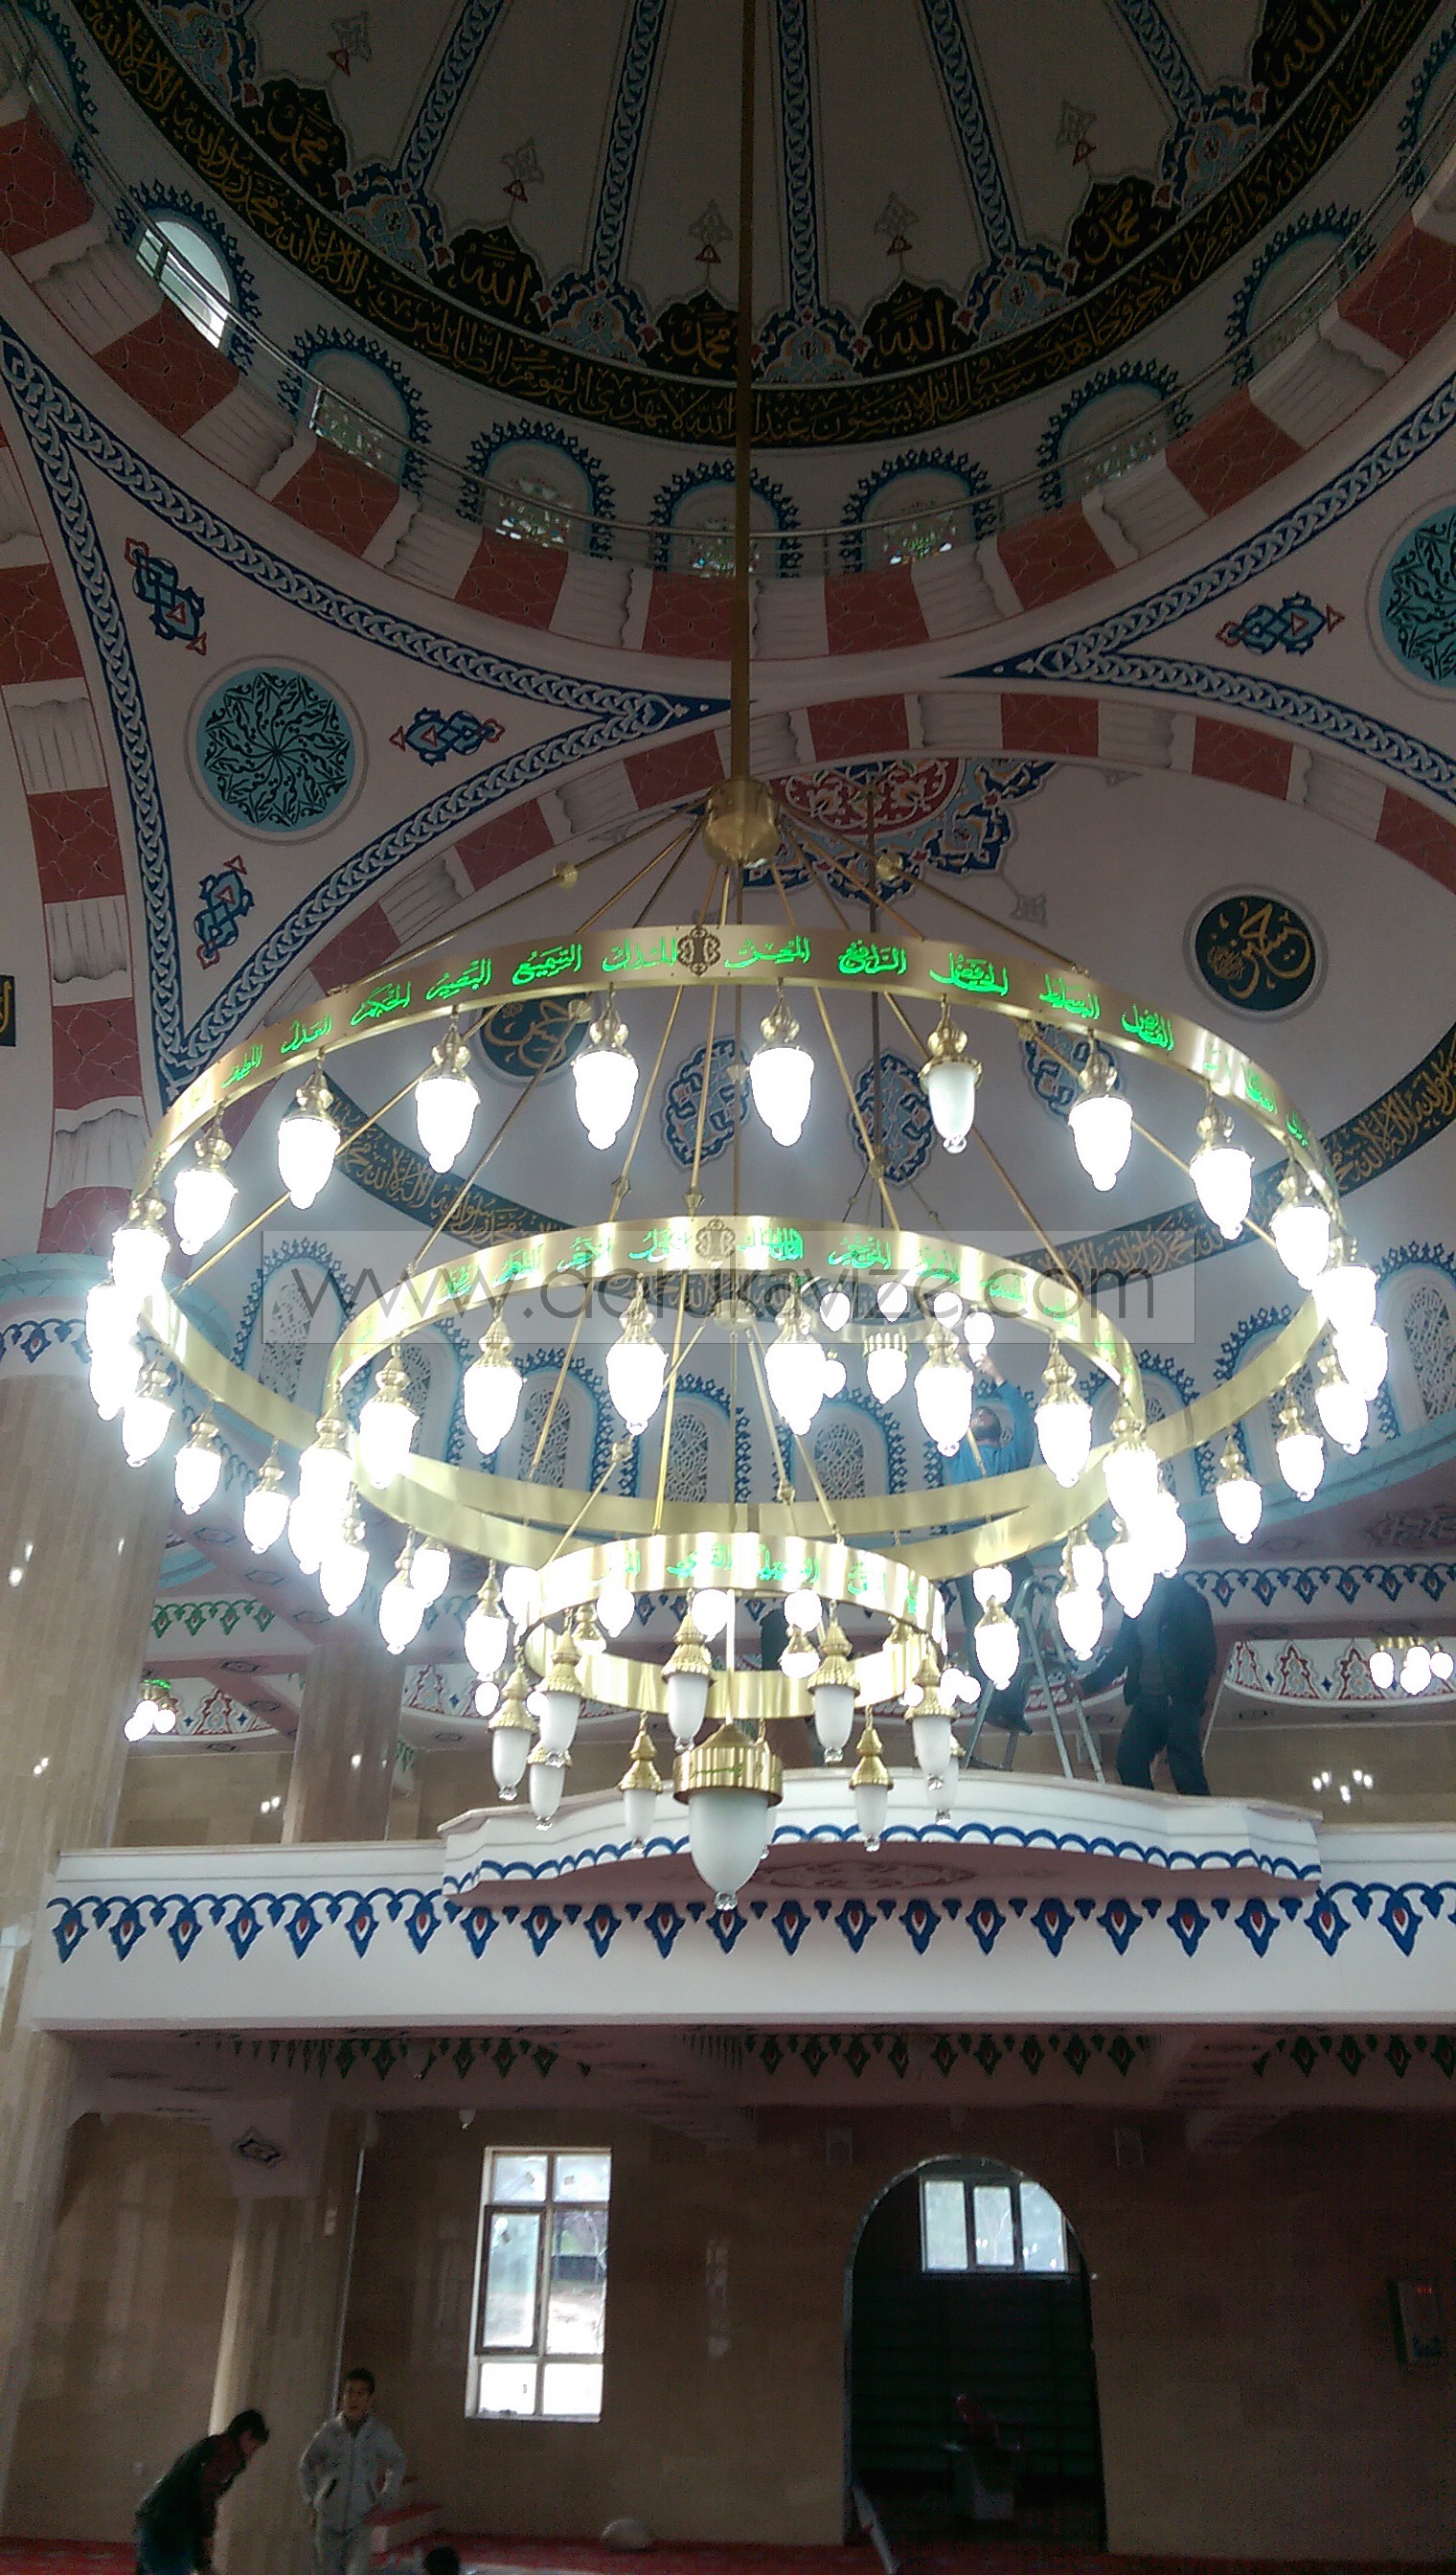 200 square (diameter) 31 bulbs under the main dome led mosque chandelier 3 tiers